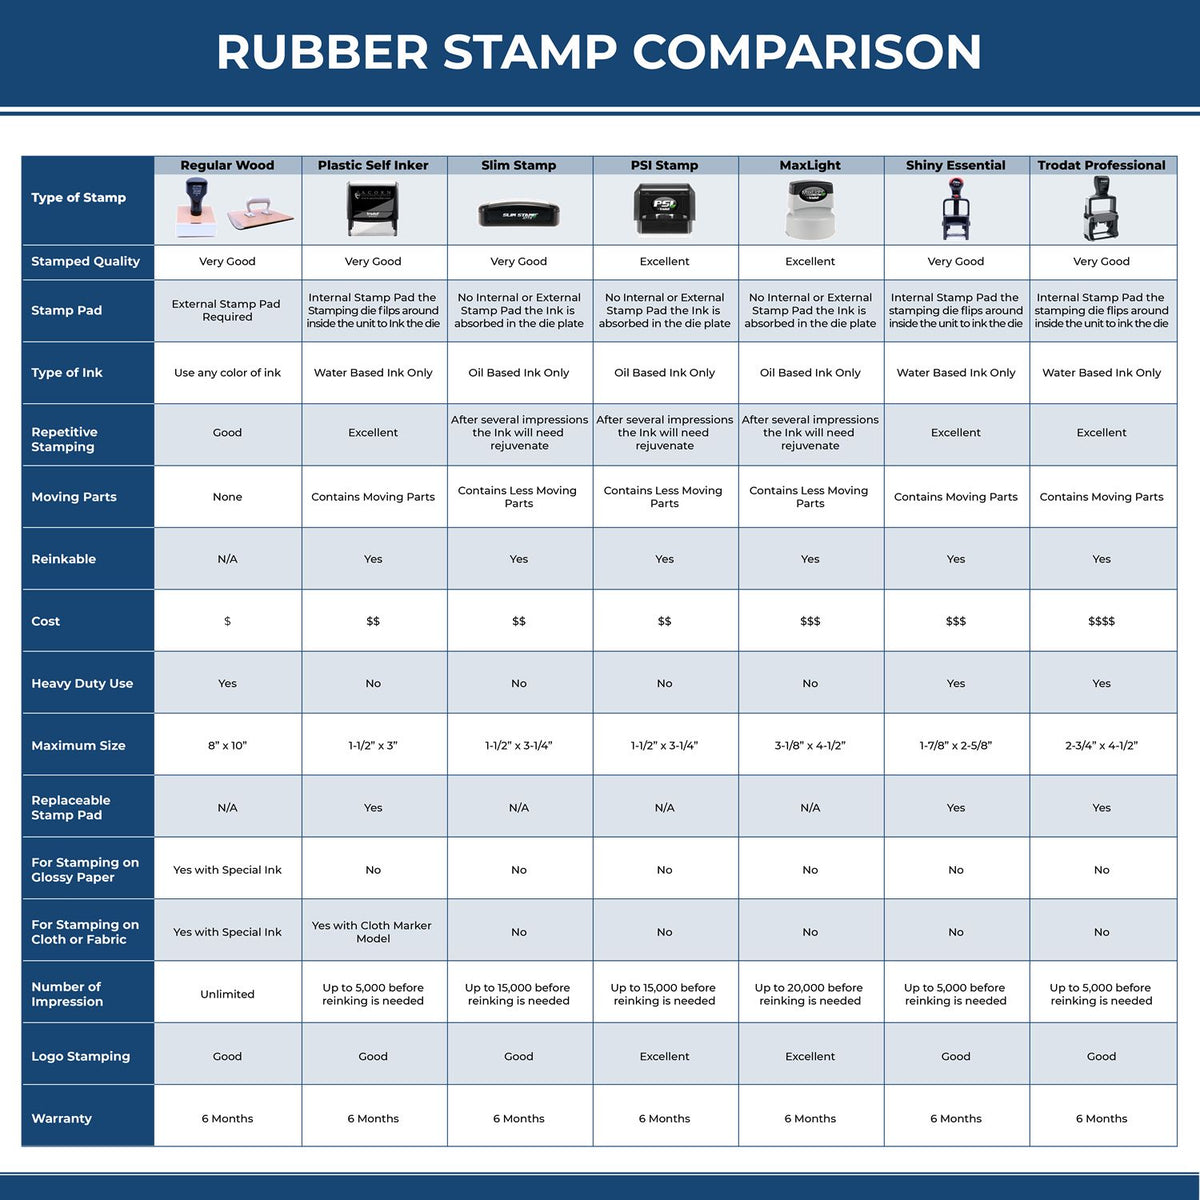 Large Pre-Inked Small Packet Stamp 5564SLIM Rubber Stamp Comparison